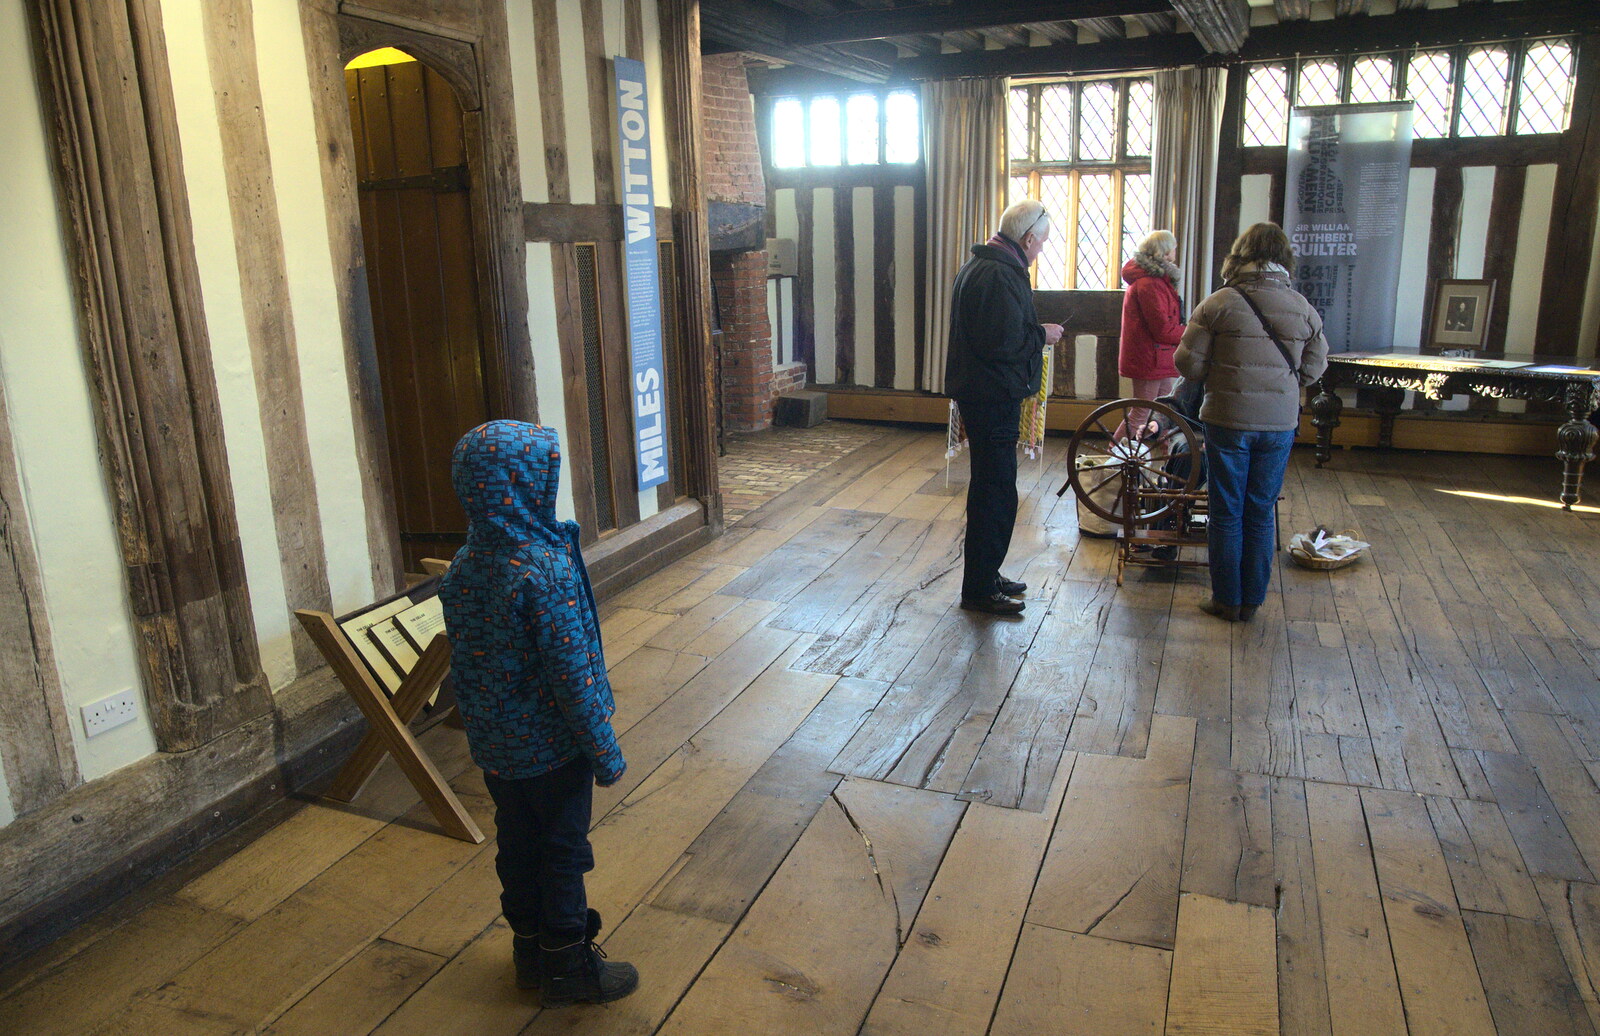 Fred upstairs in the Guildhall museum from A Day in Lavenham, Suffolk - 22nd January 2017